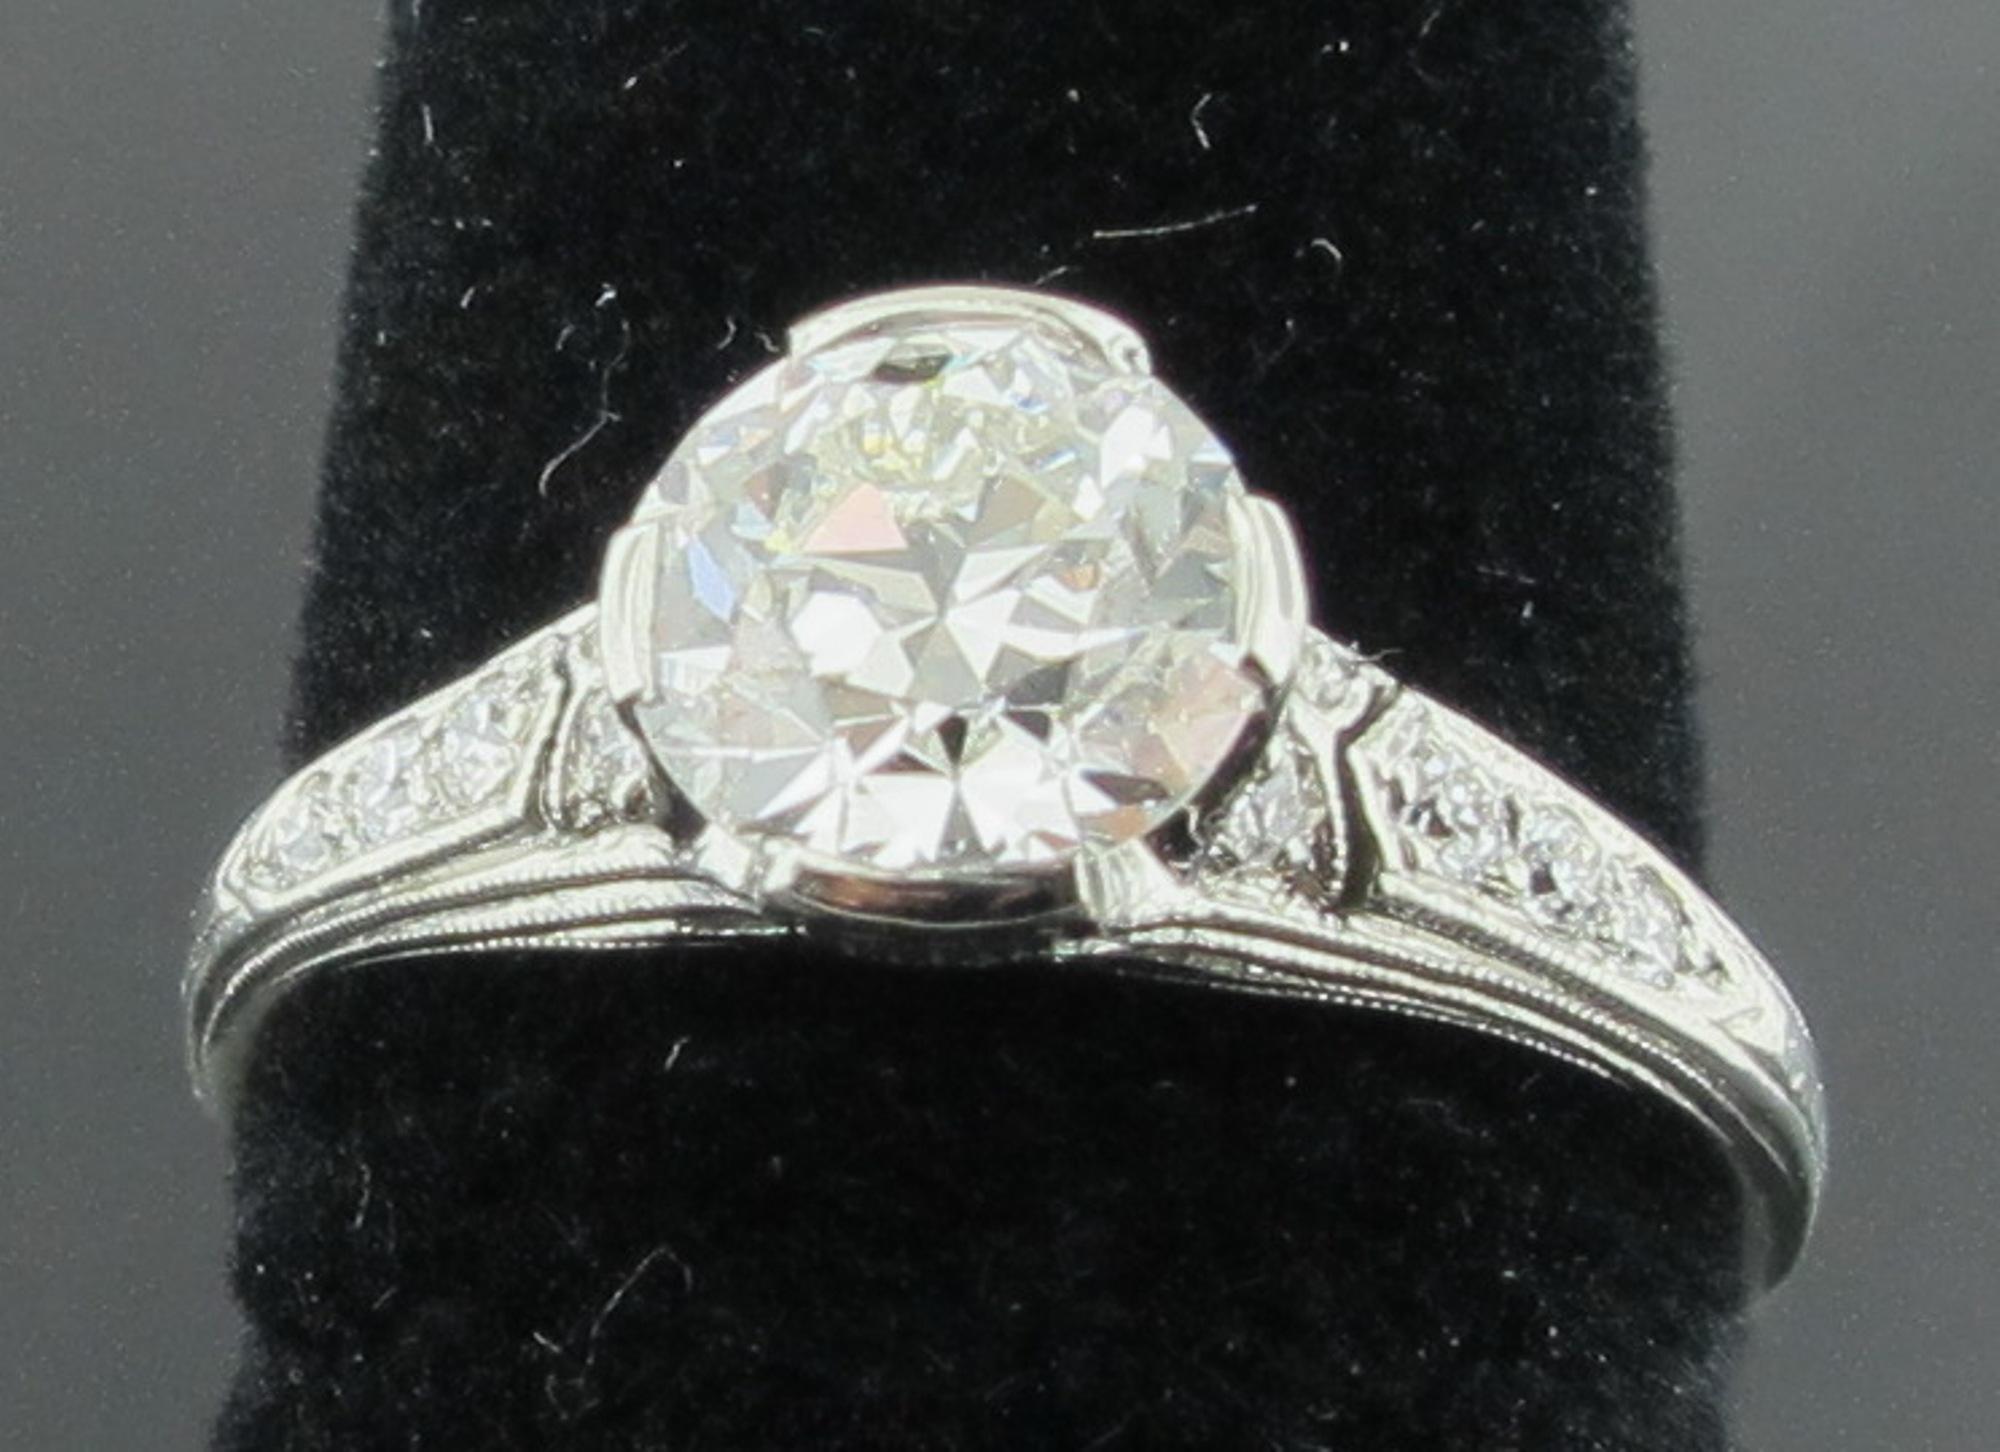 Vintage Tiffany & Co. Platinum ring with a Transitional Cut center diamond weighing 1.20 carats, Color G-H, Clarity VS.  Ring includes 10 round brilliant cut diamonds of the same period, weighing 0.10 carats.  Set in Platinum.  Ring size is 6.